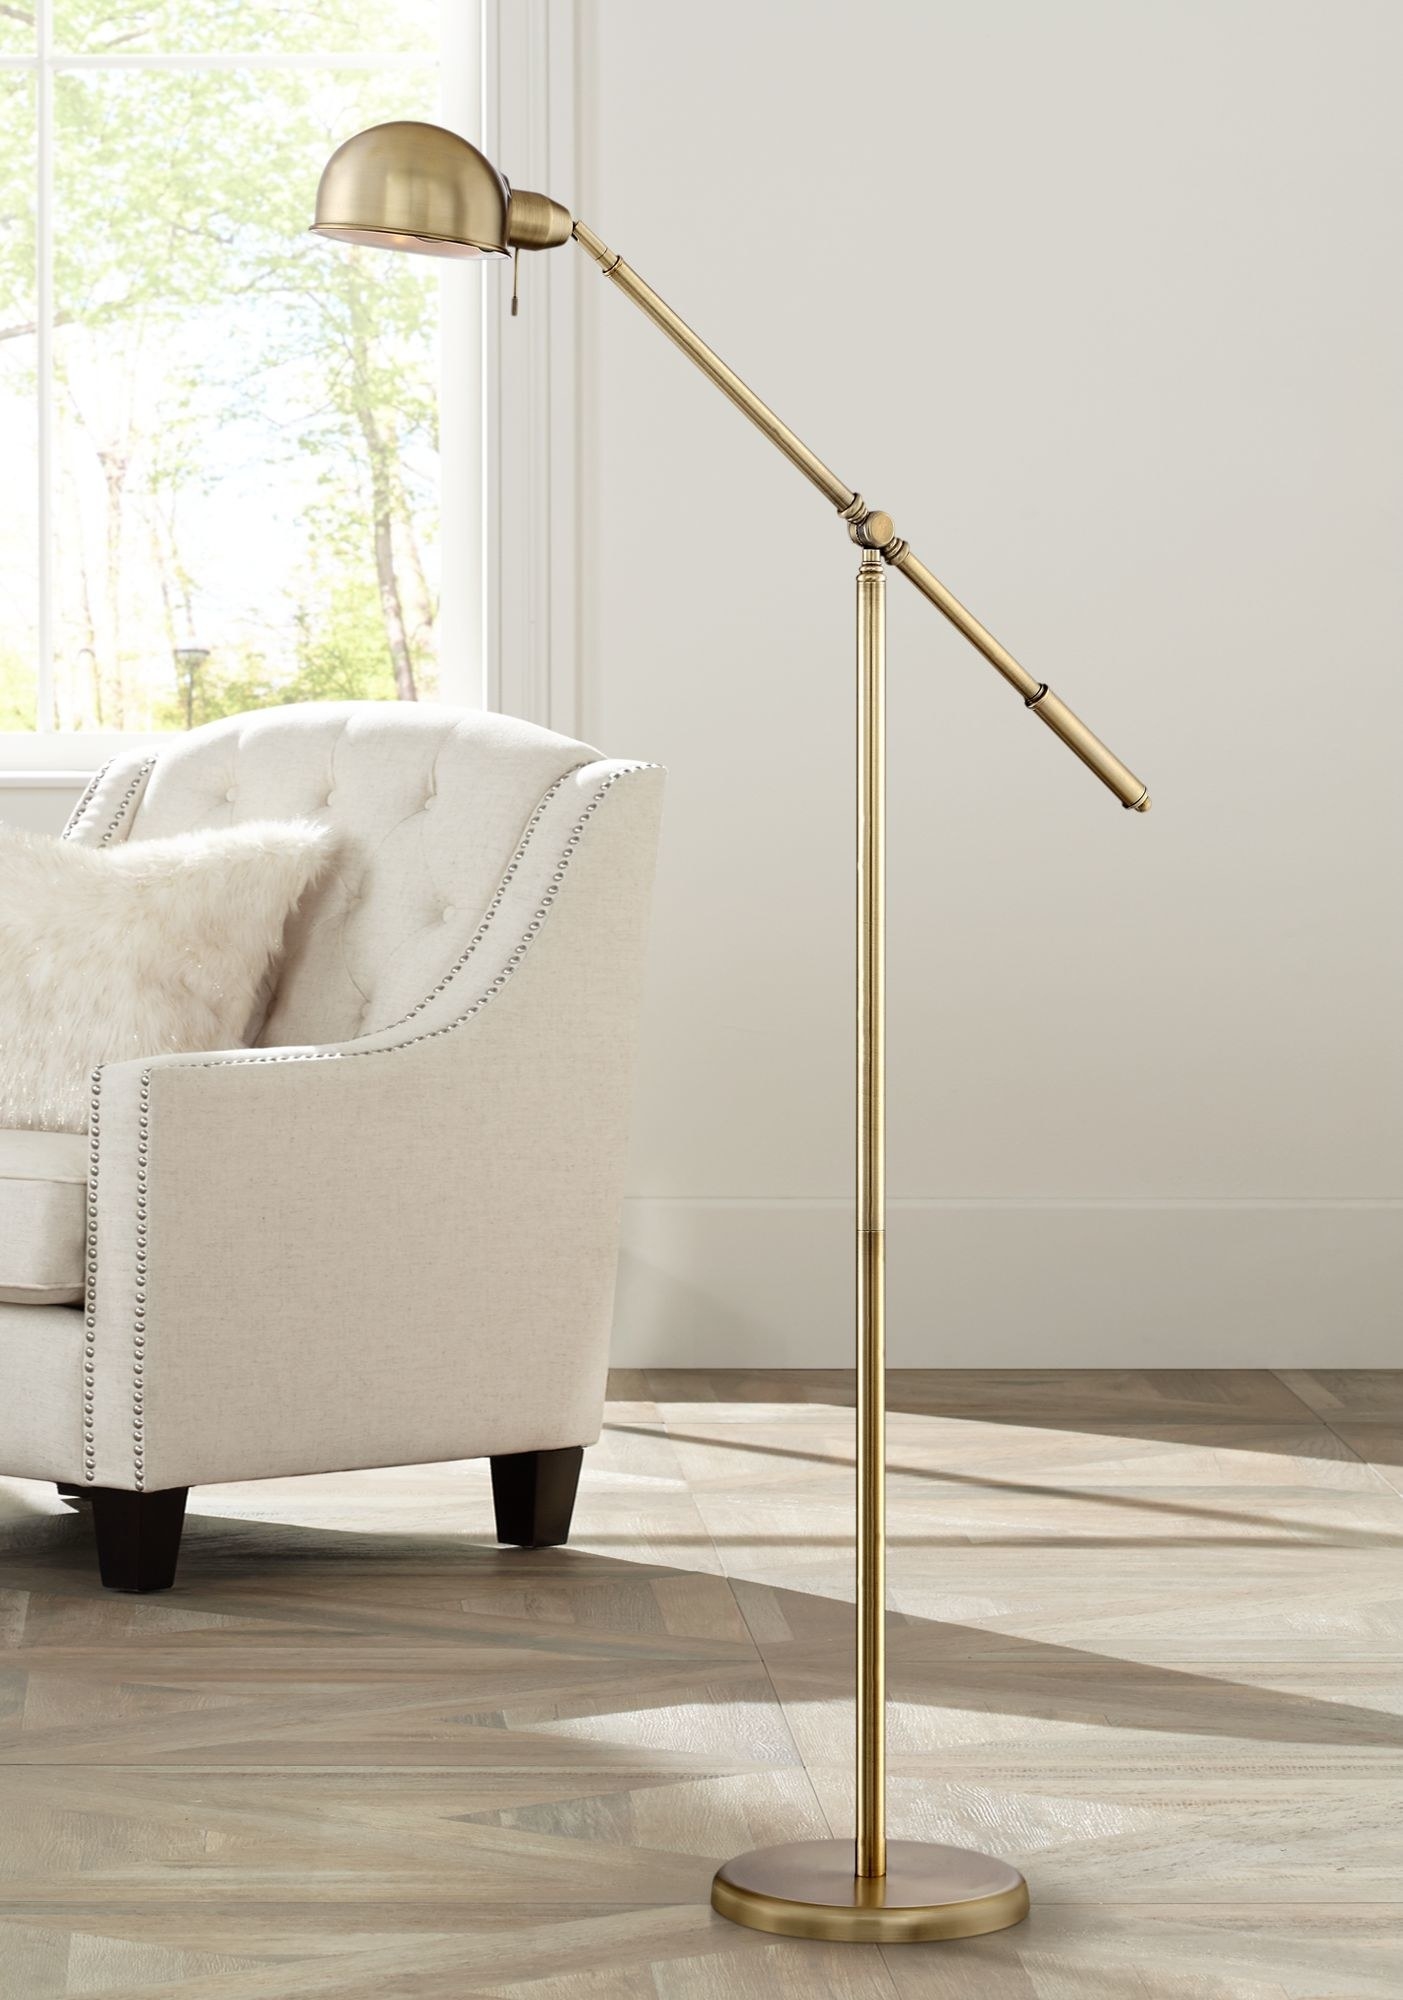 A brass pharmacy-style floor lamp with a boom-style arm that can be adjusted into any position